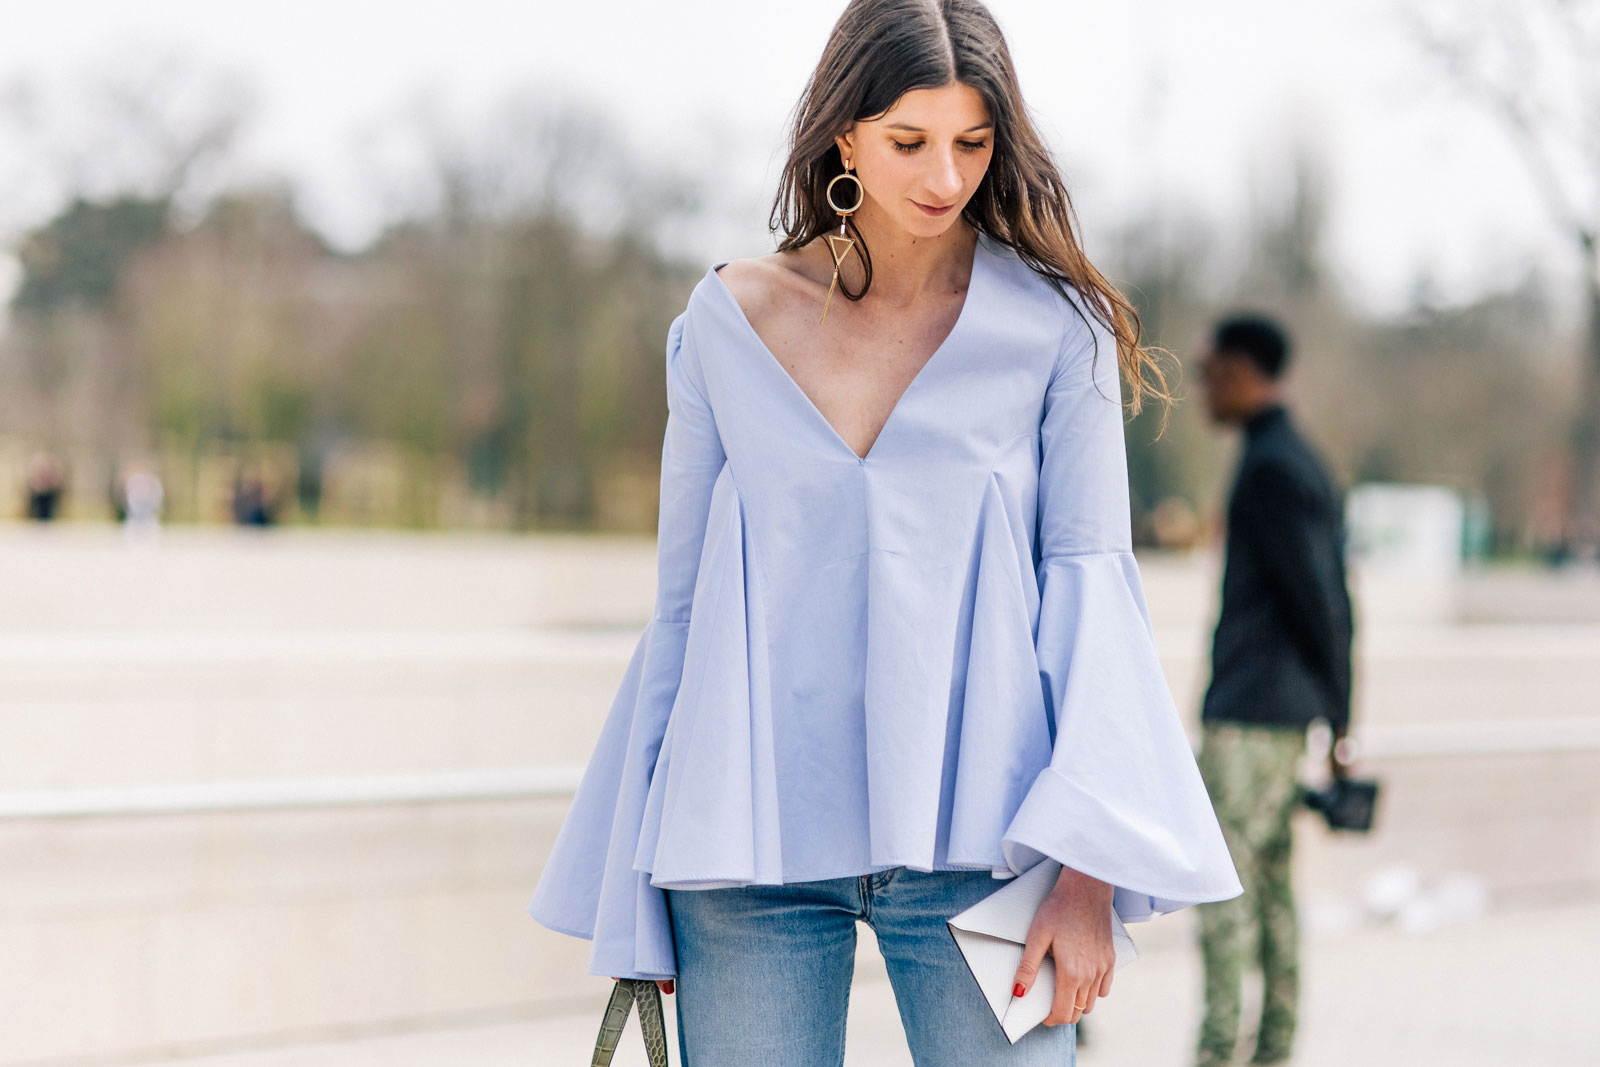 Labériane Ponton wearing an Ellery top, Levis jeans and Zara earring after the Louis Vuitton Fall/Winter 2015-2016 fashion show in Paris, France